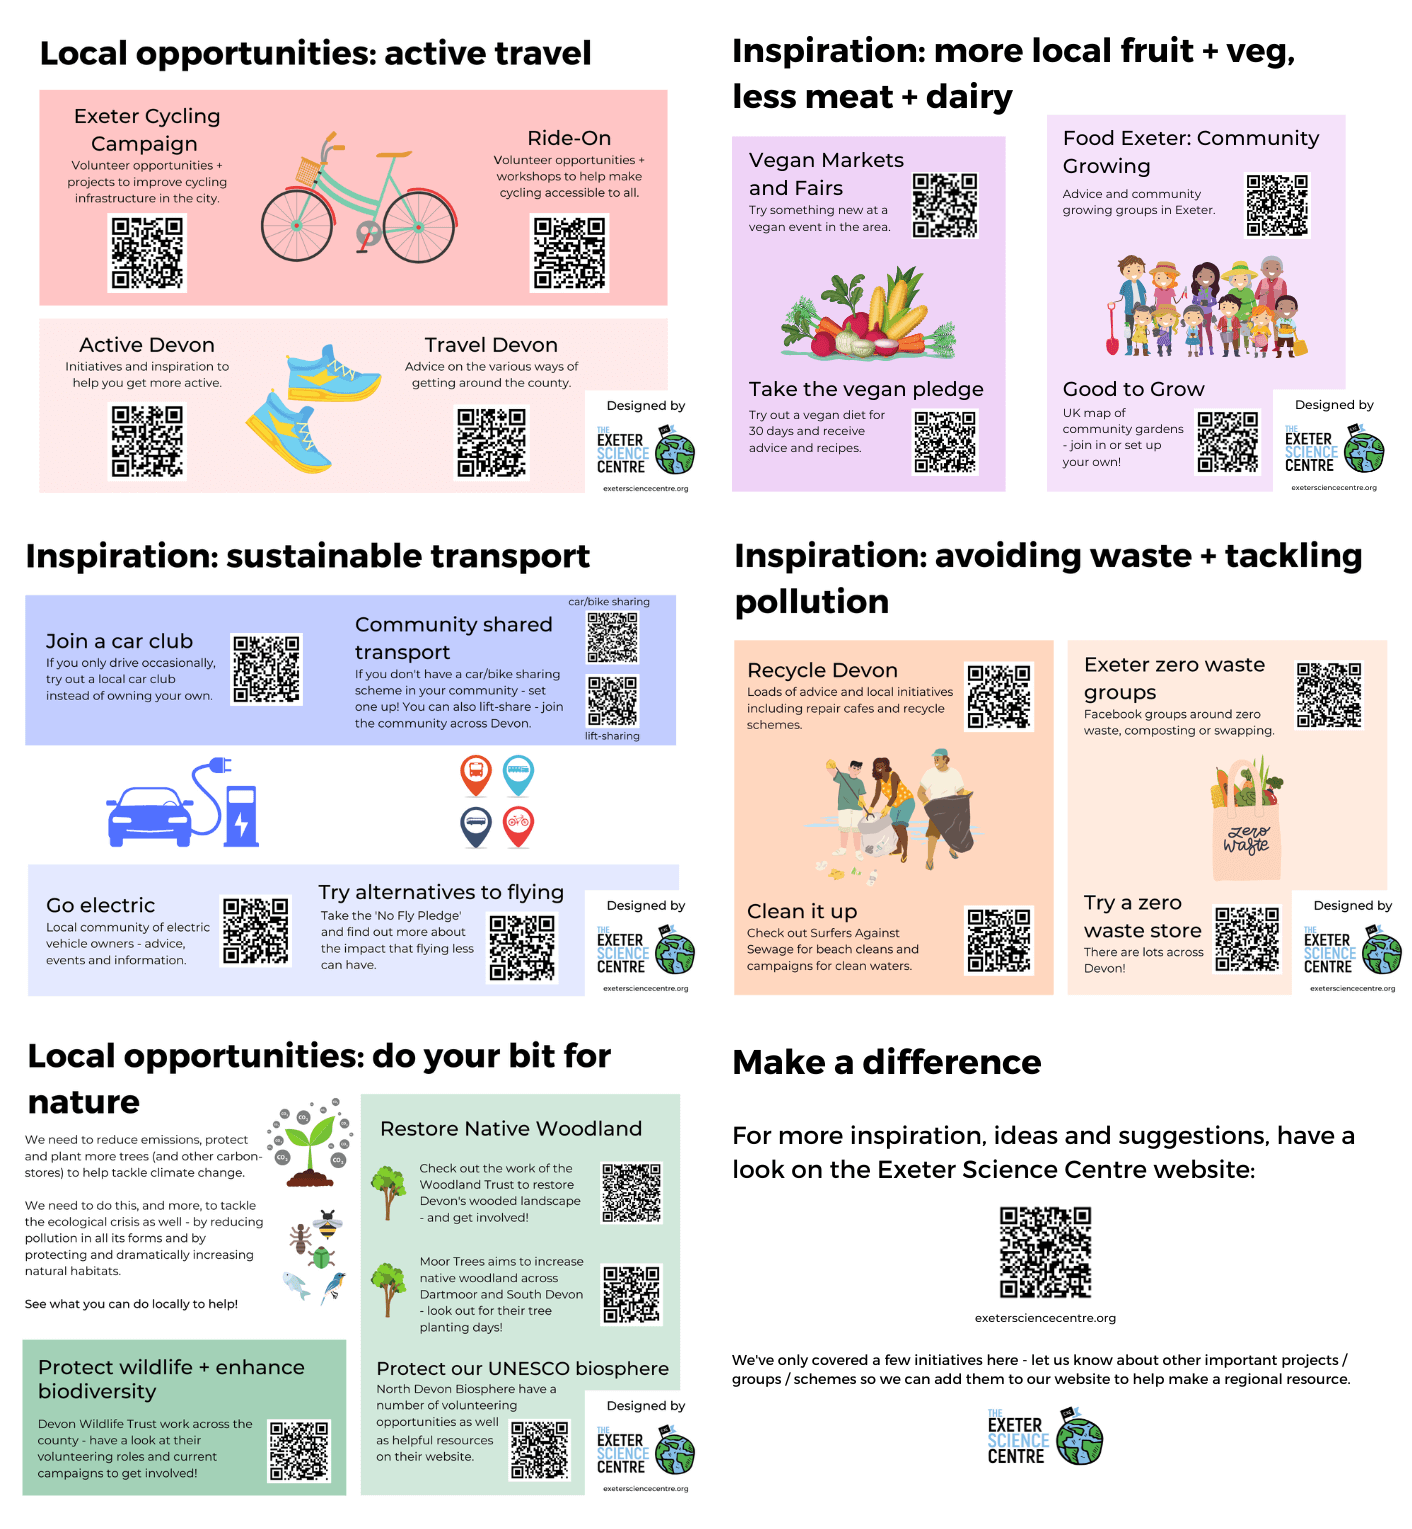 An informational poster about local opportunities and inspiration for environmental responsibility. It includes sections on active travel, plant-based diets, sustainable transport, reducing waste, and supporting nature. Each section provides brief tips and resources for community involvement